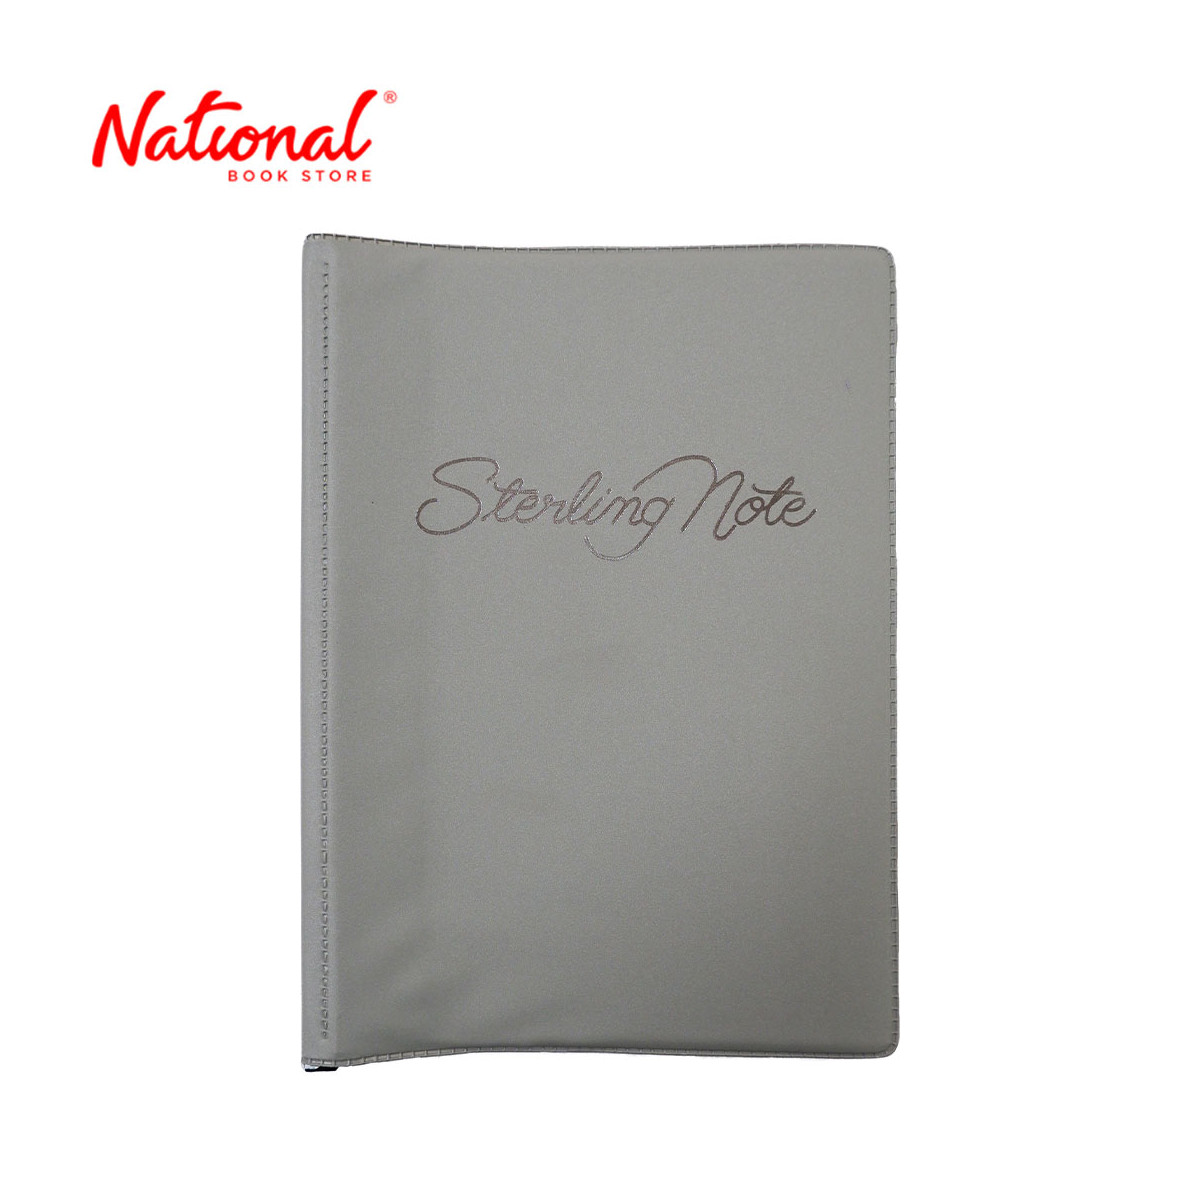 https://www.nationalbookstore.com/137963-thickbox_default/sterling-clip-binder-notebook-6x8-5-inches-9-fillers-16s-plain-leatherette-cover-color-may-vary.jpg